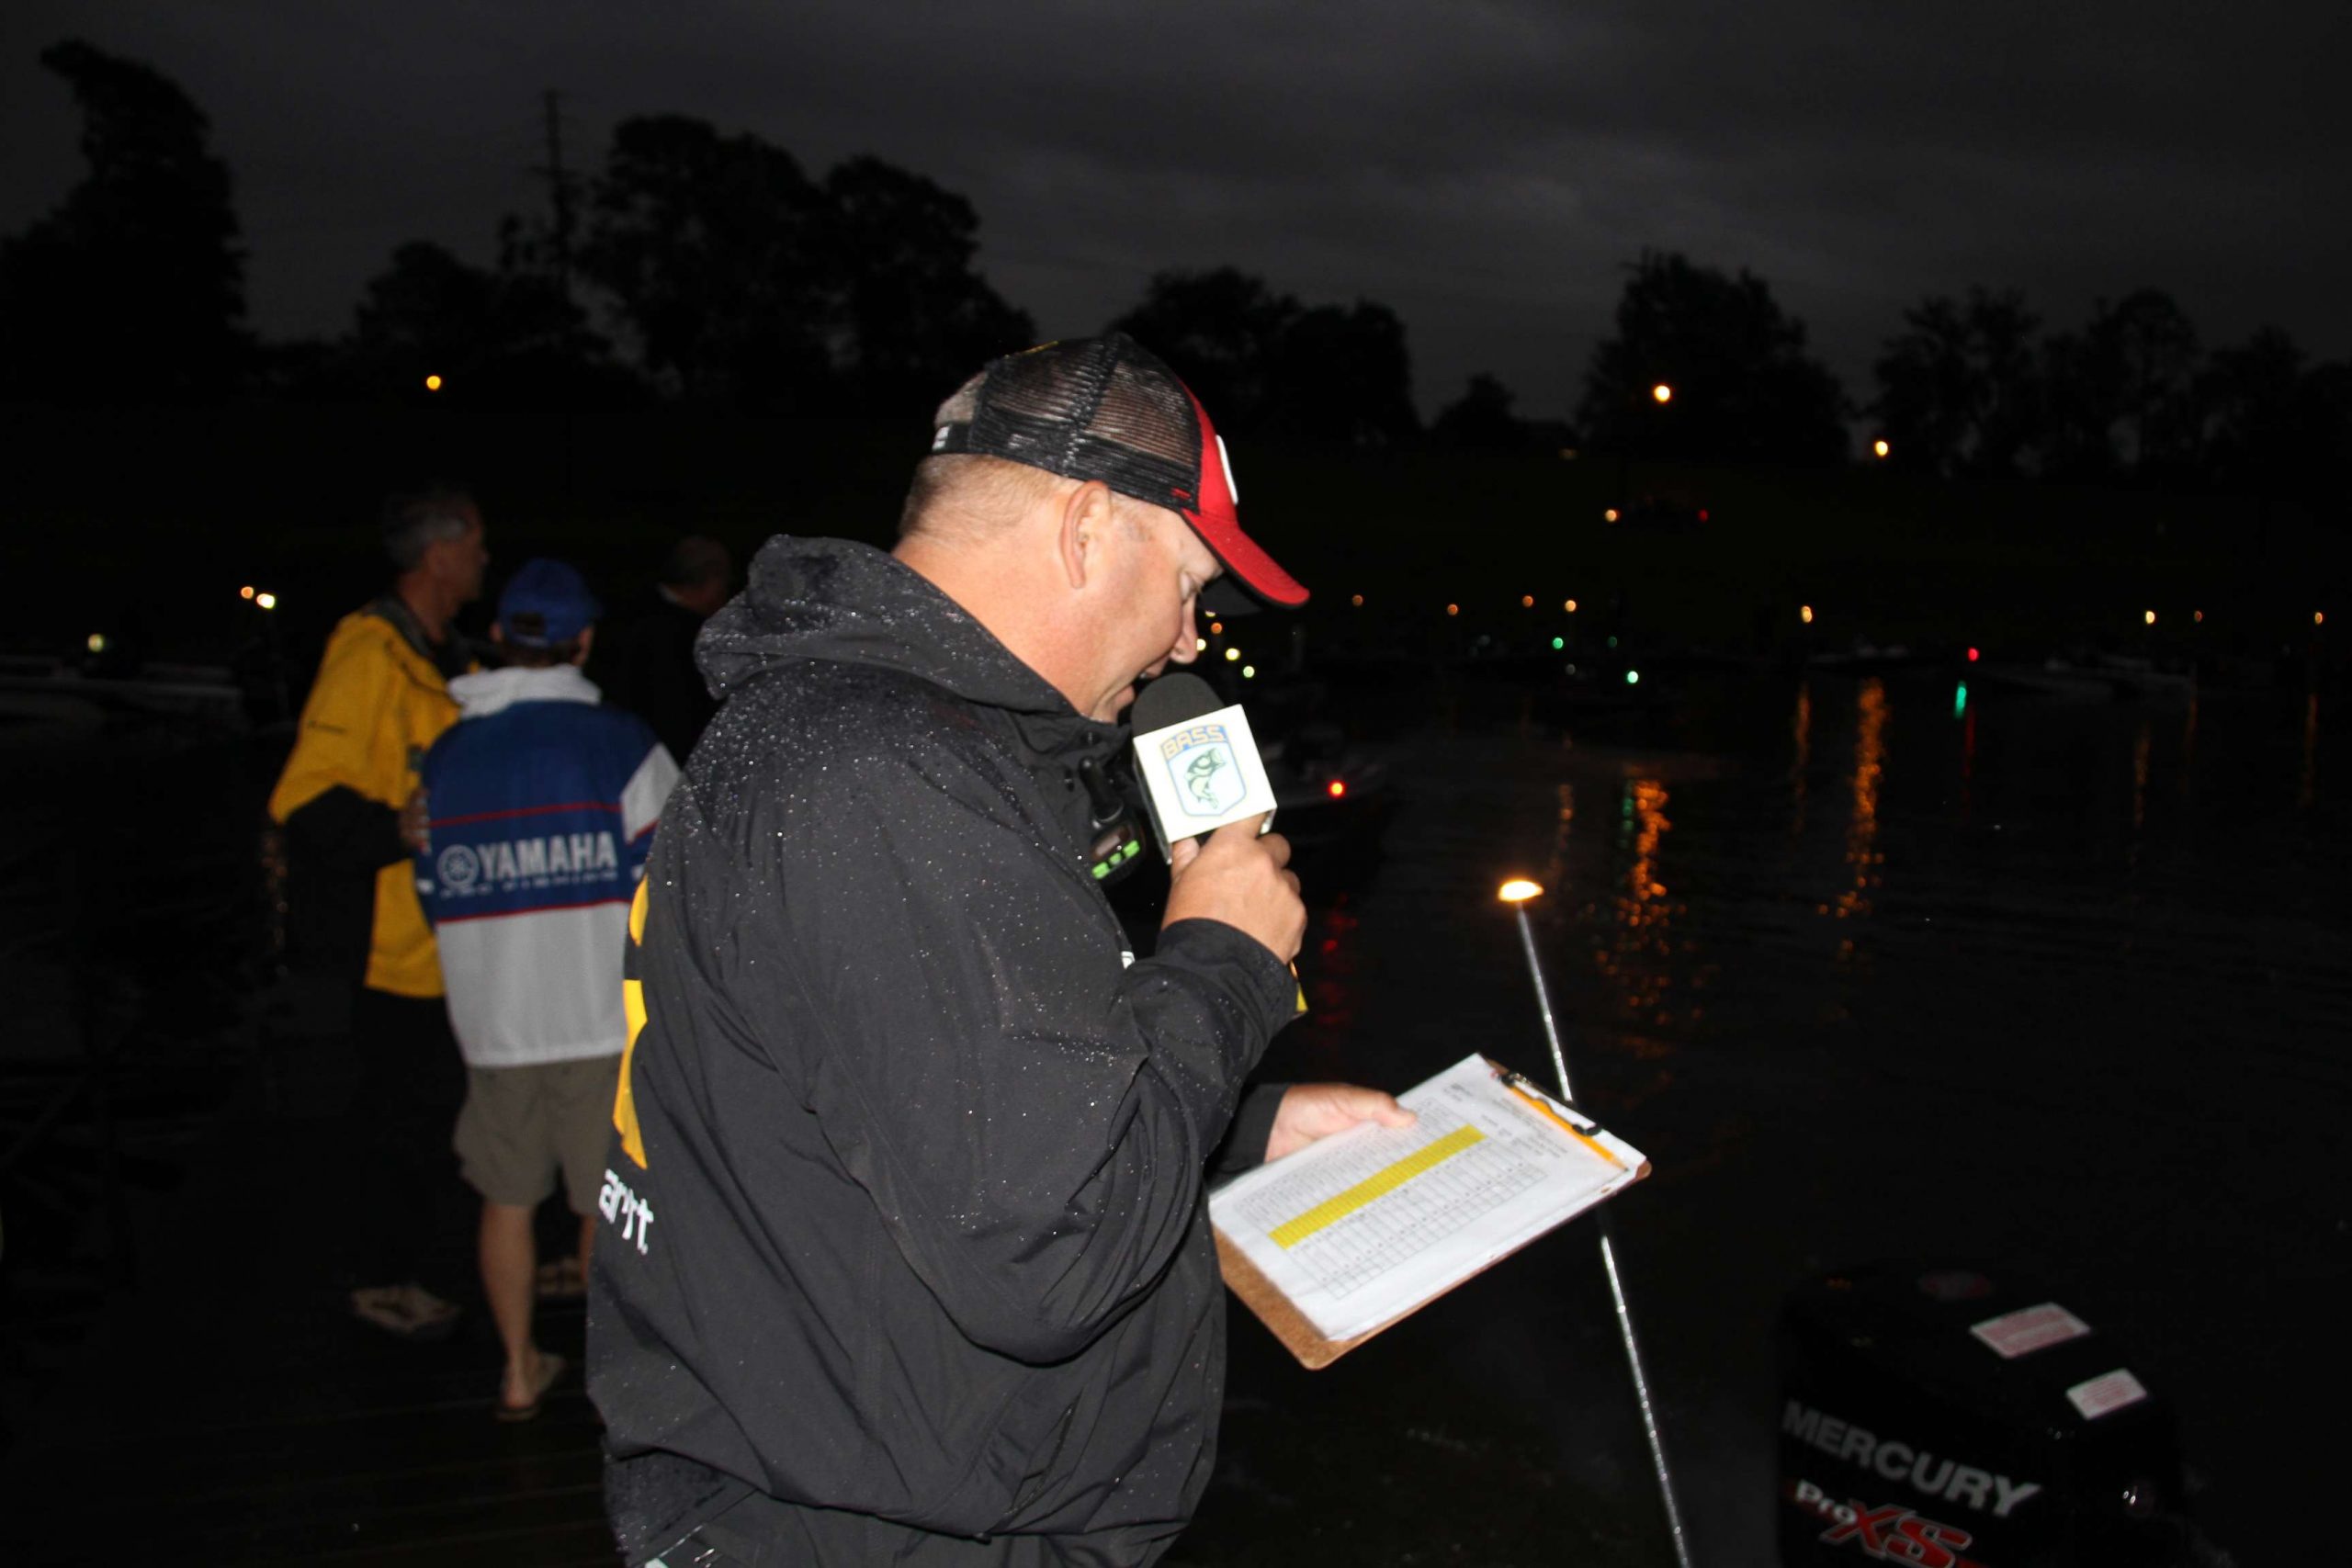 B.A.S.S. Nation Director Jon Stewart calls off anglers' names as they head out on the water.